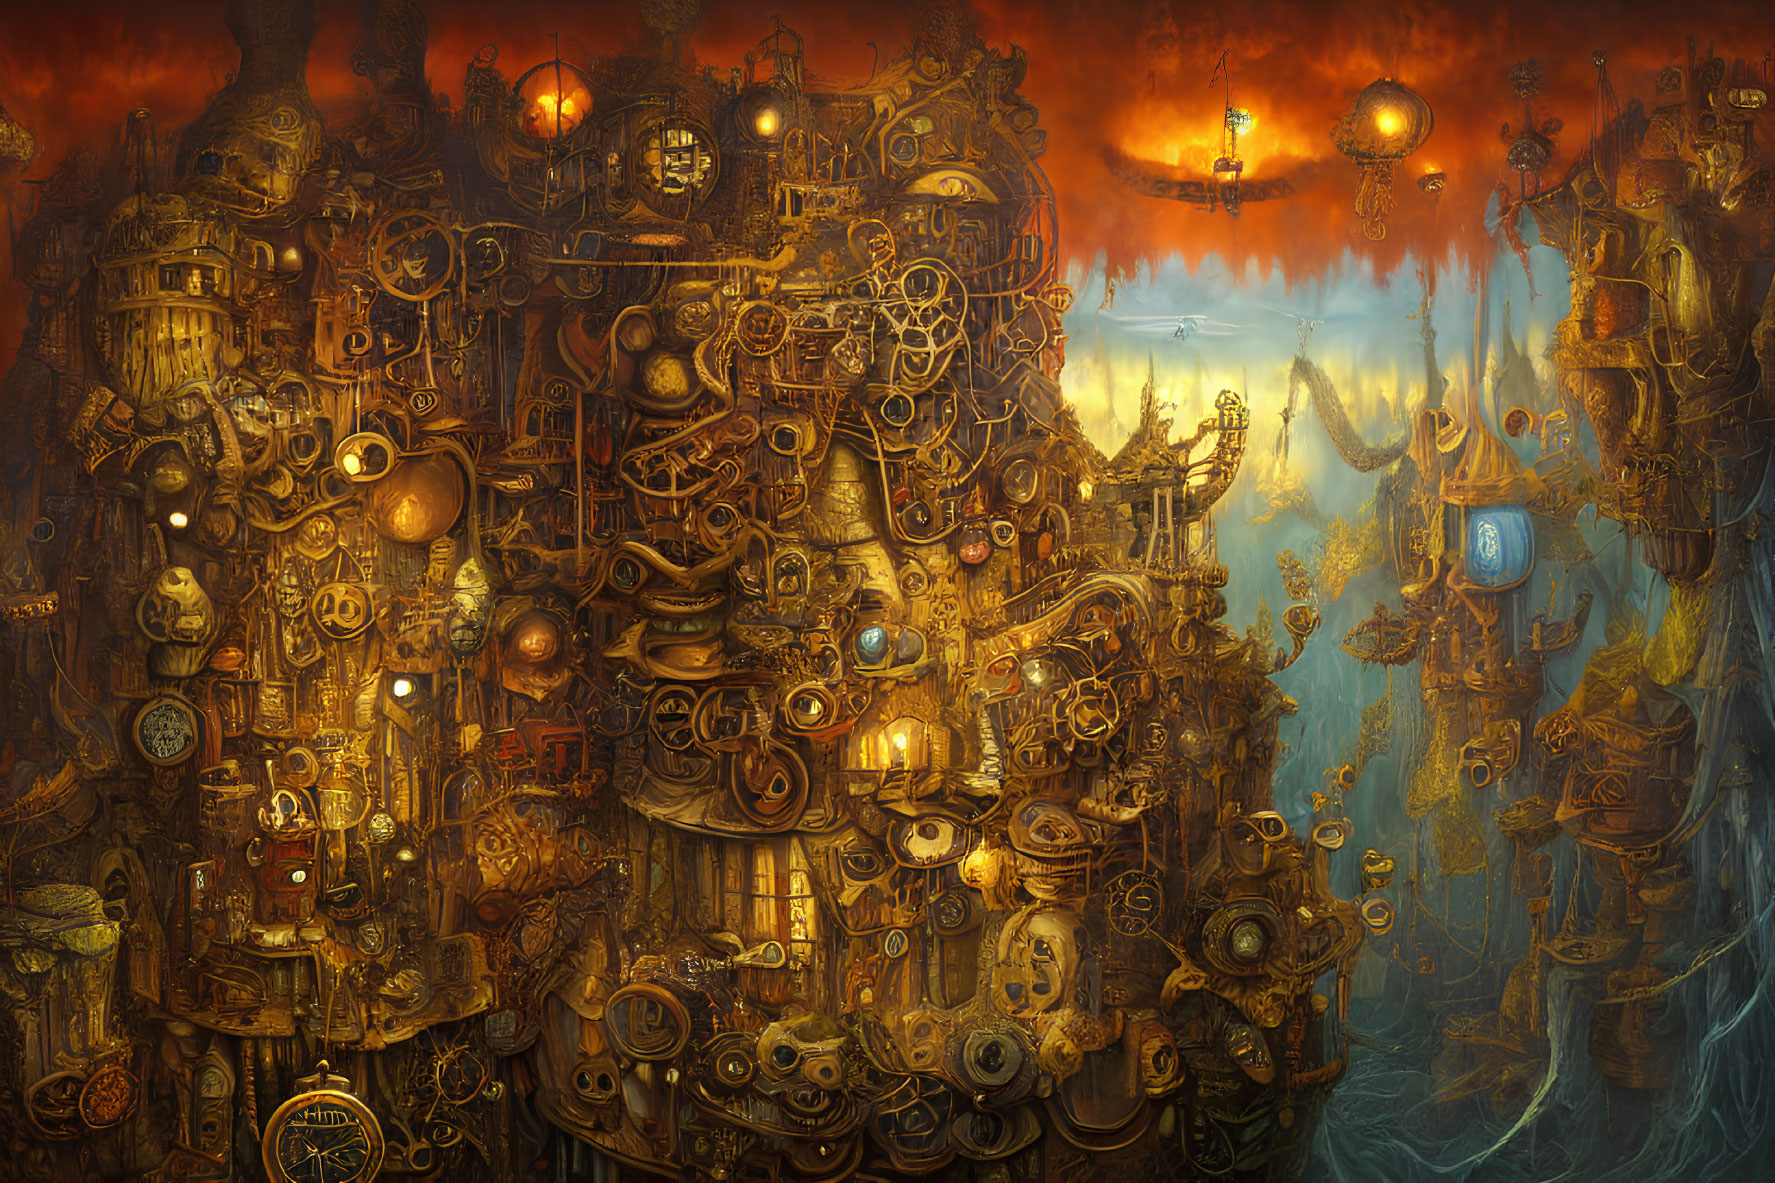 Detailed Steampunk Cityscape with Machinery, Gears, and Airships